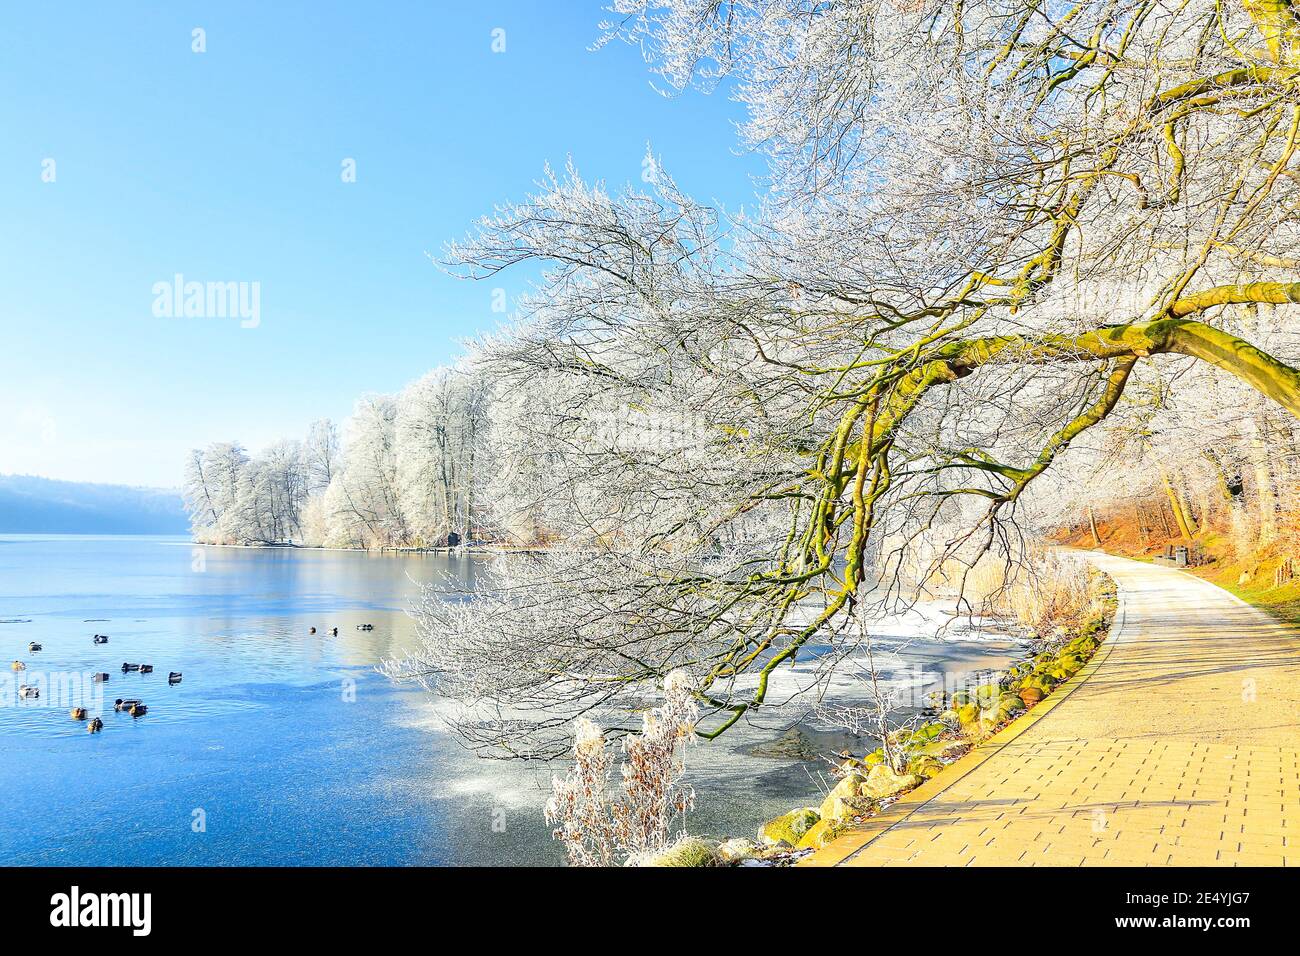 Inviting winter scene at the Dieksee in Malente. The sunny day invites you to take a walk. Stock Photo